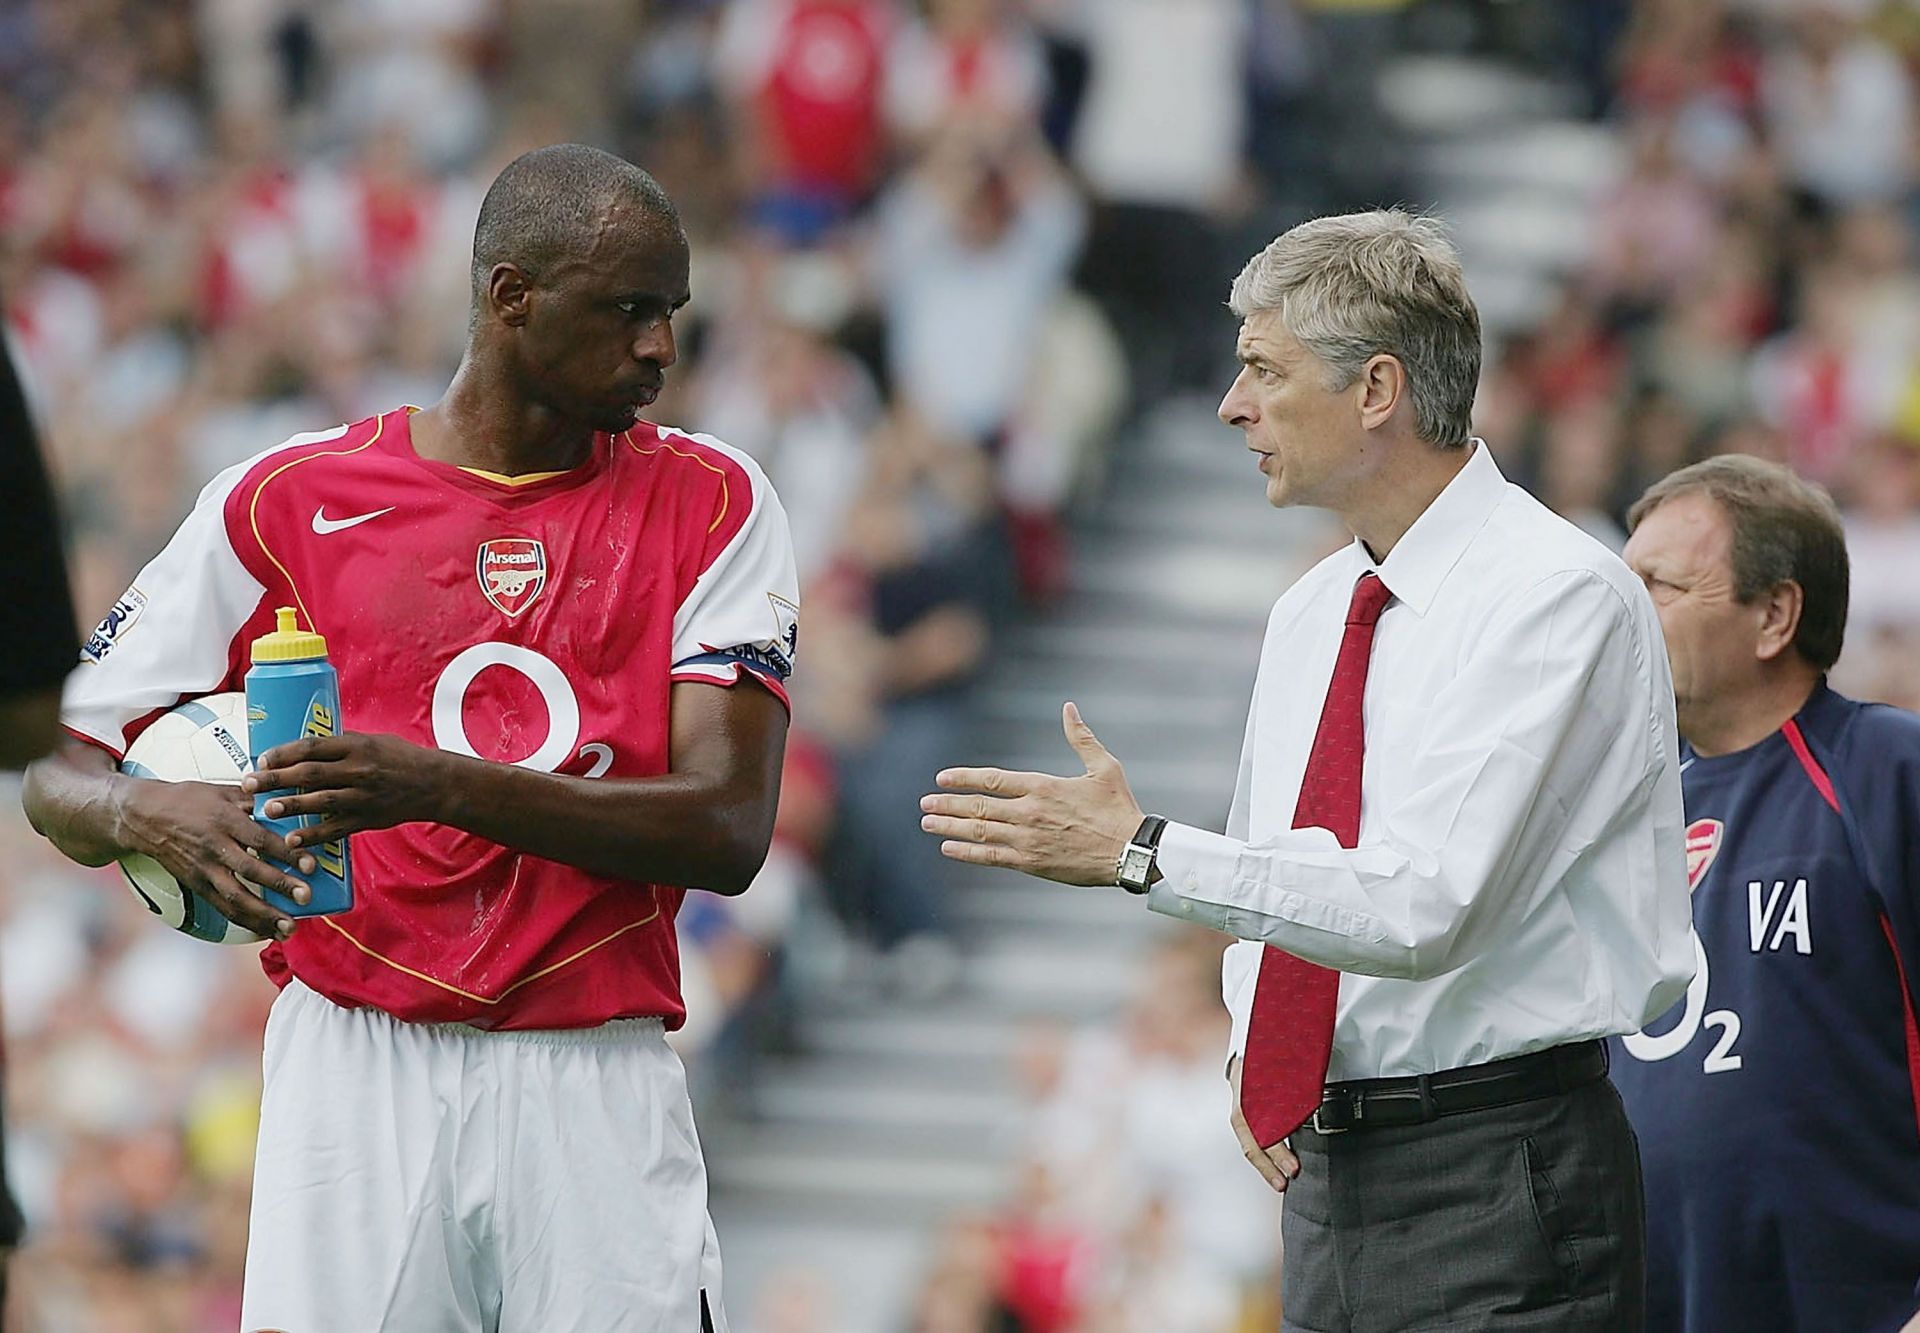 Patrick Vieira was the commander-in-chief for Arsene Wenger in the midfield